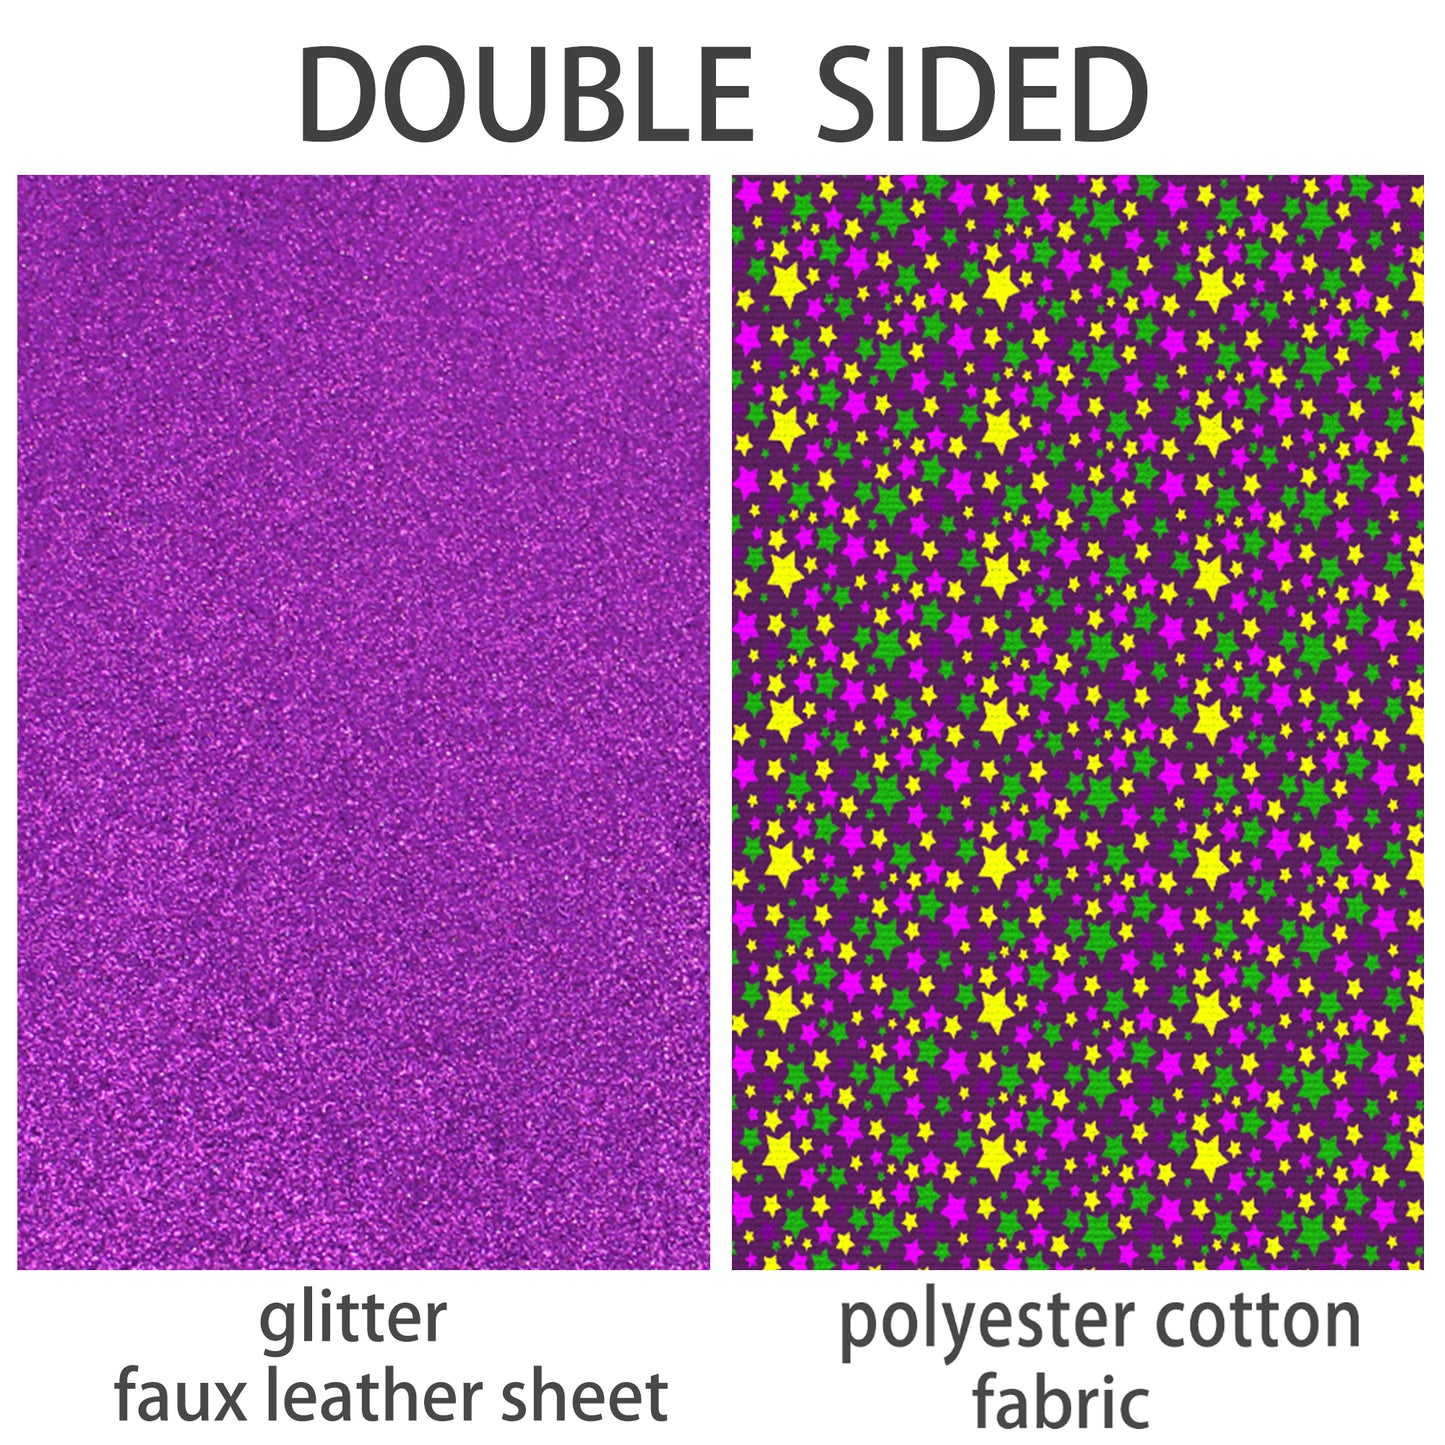 Mardi gras Double Sided Faux Leather Sheet and Fabric